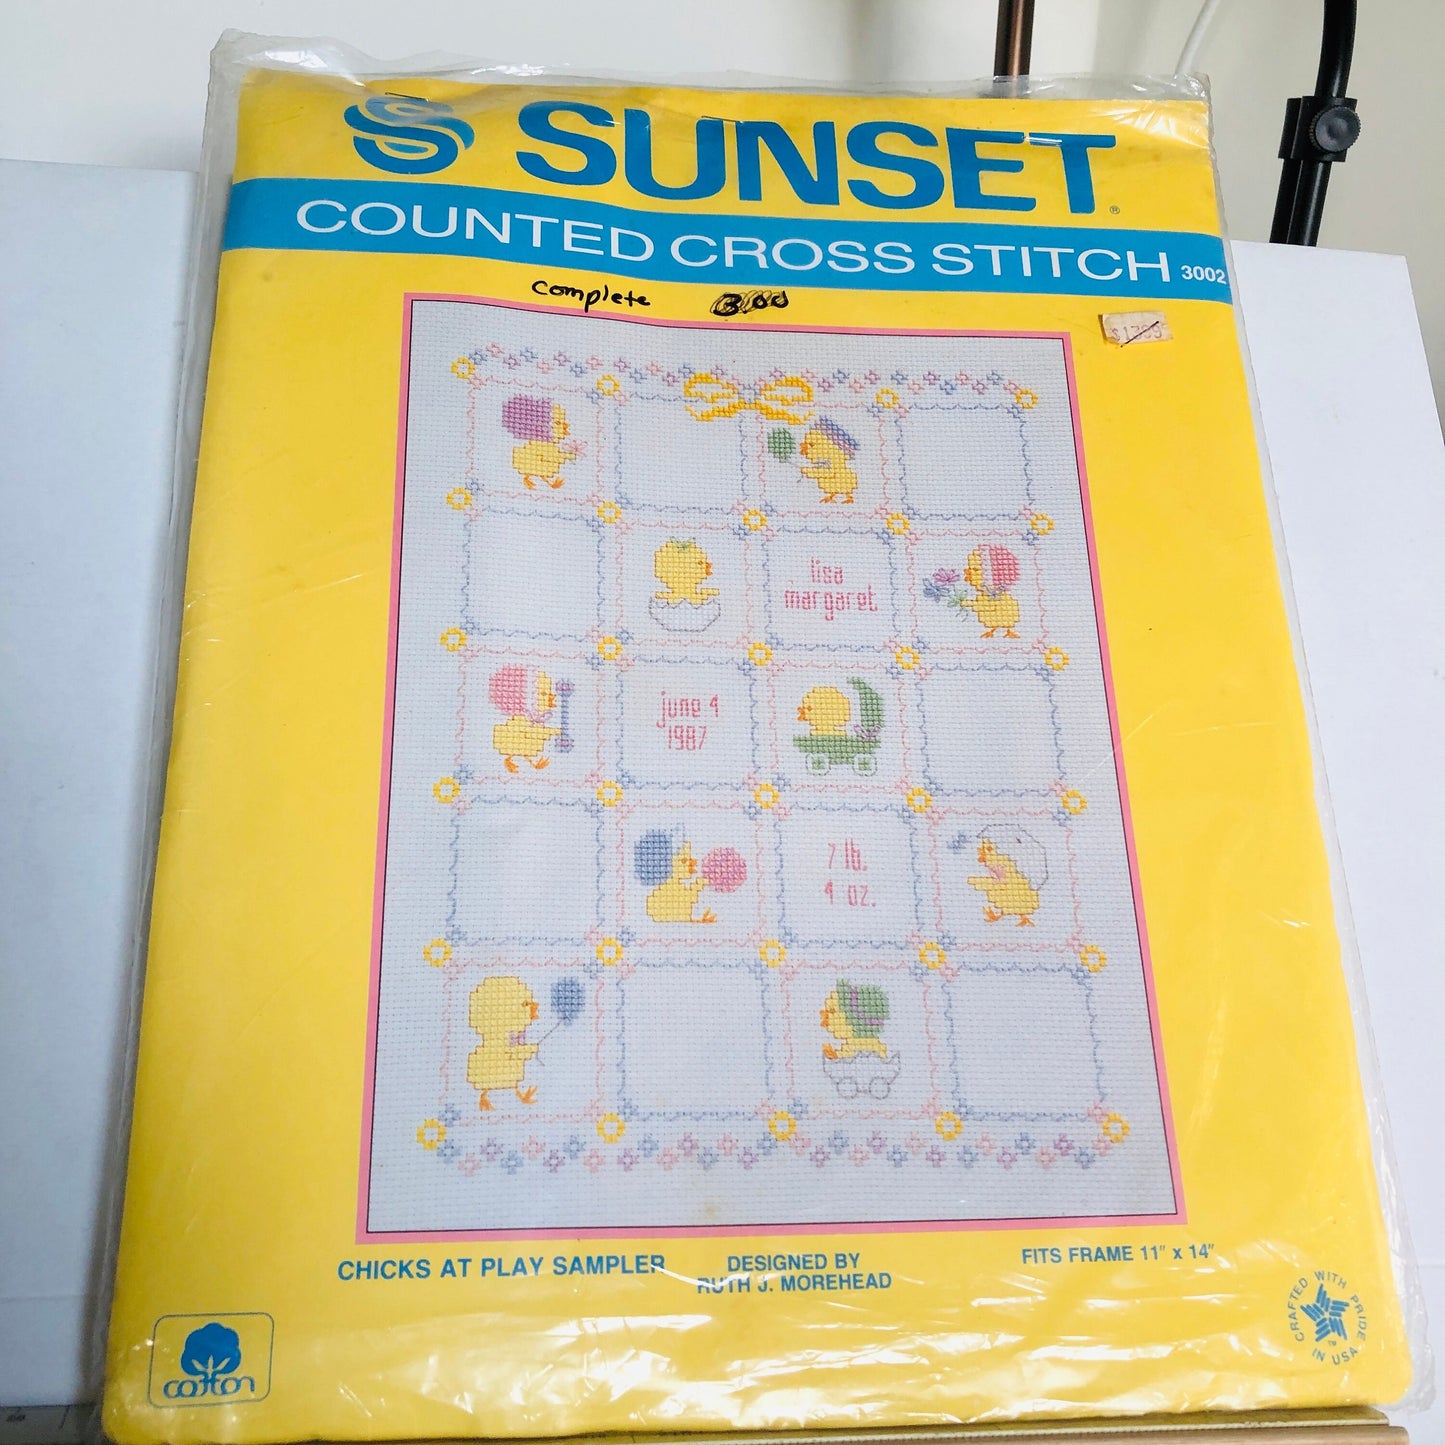 Sunset, Chick's At Play Sampler, Vintage 1986, Counted Cross Stitch Kit*